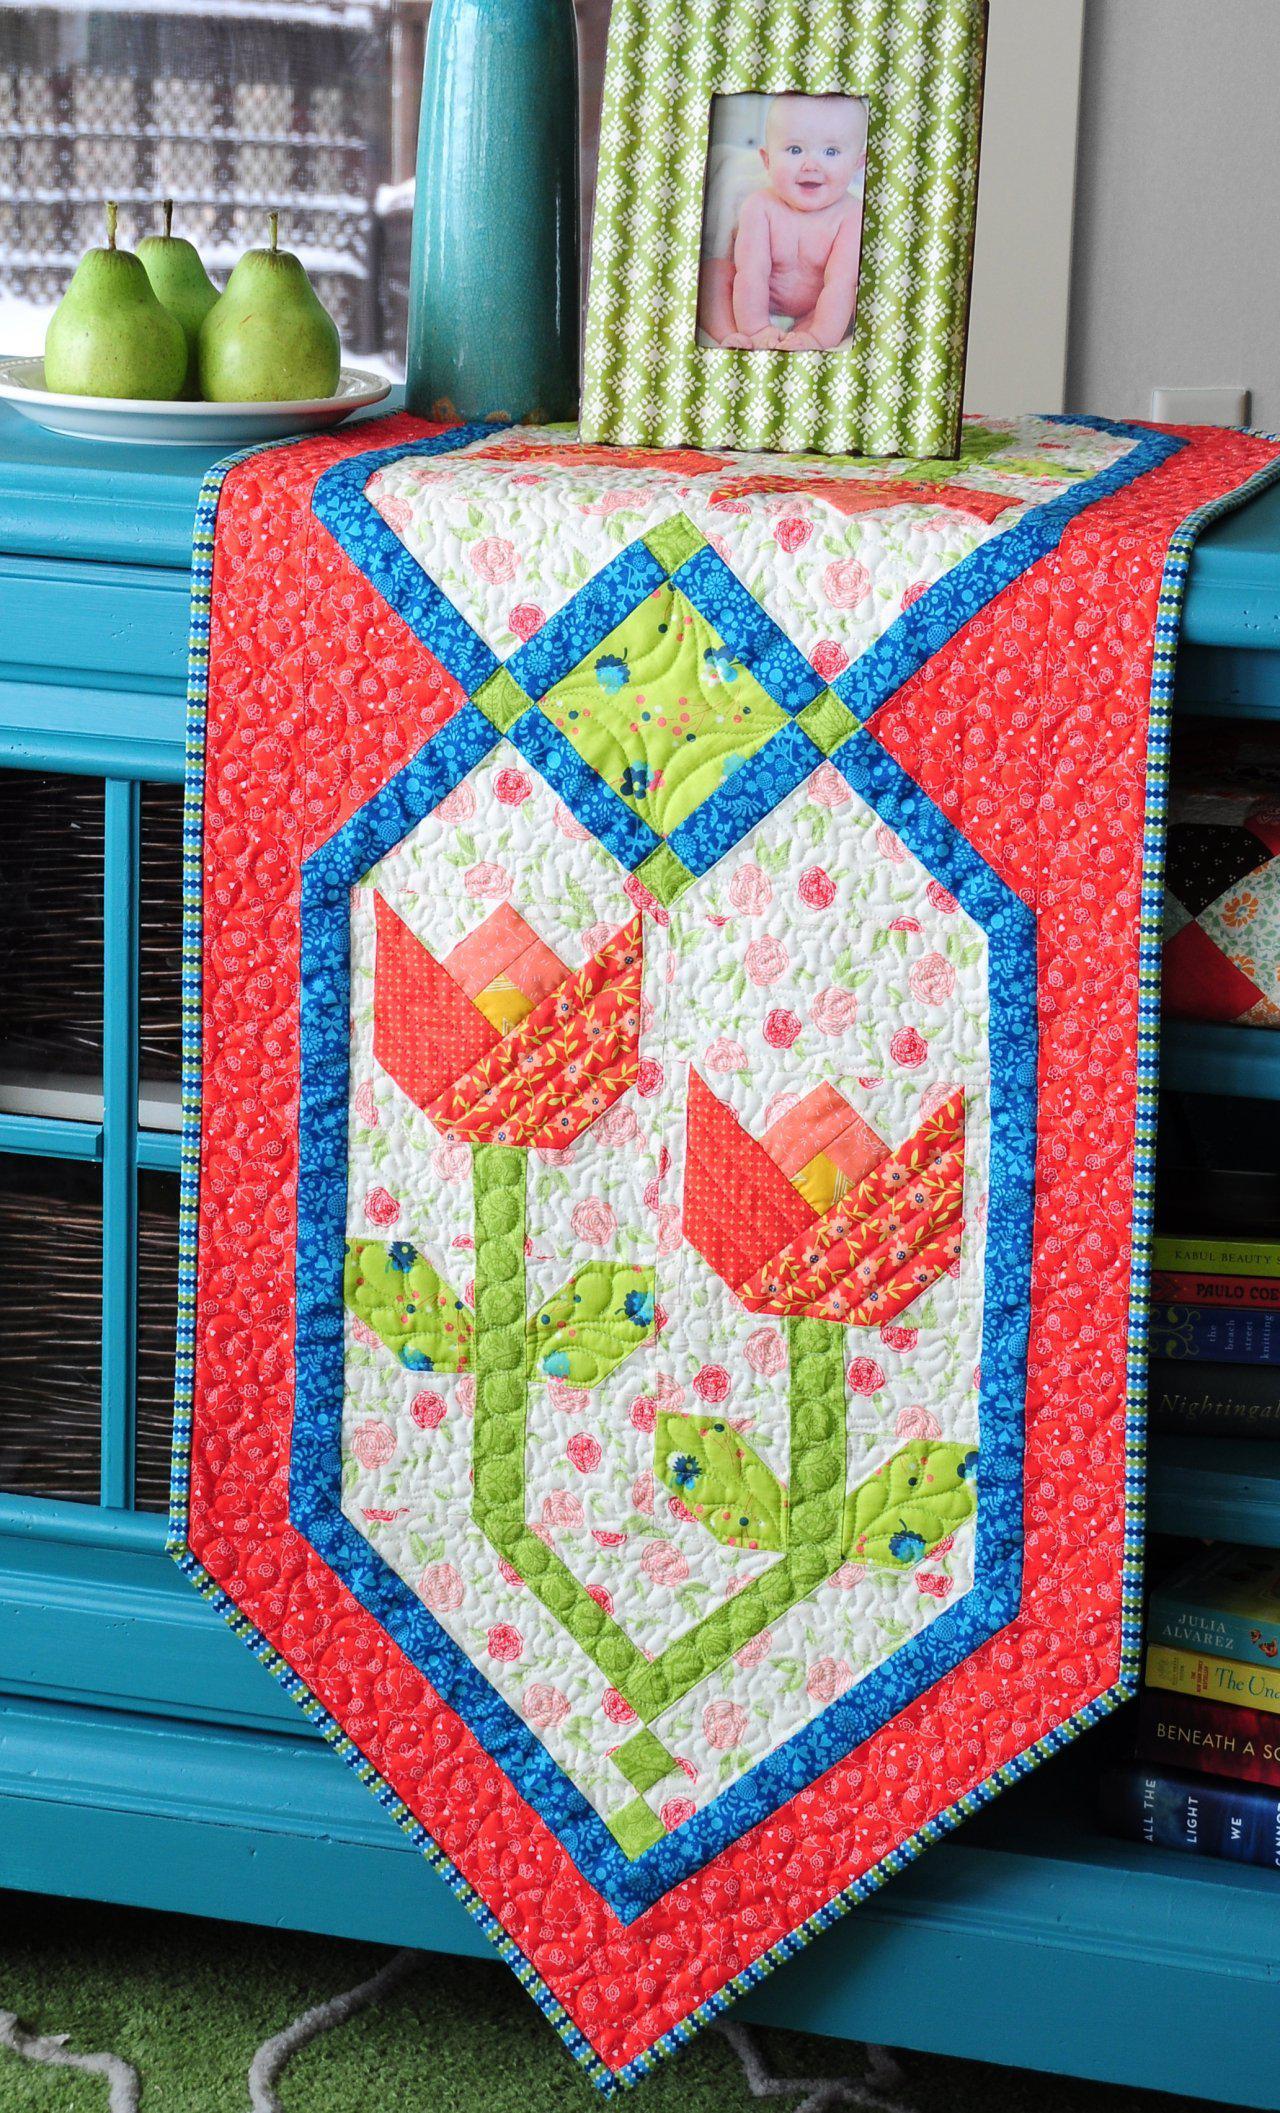 Trendy Table 2 Quilts-Anka's Treasures-My Favorite Quilt Store